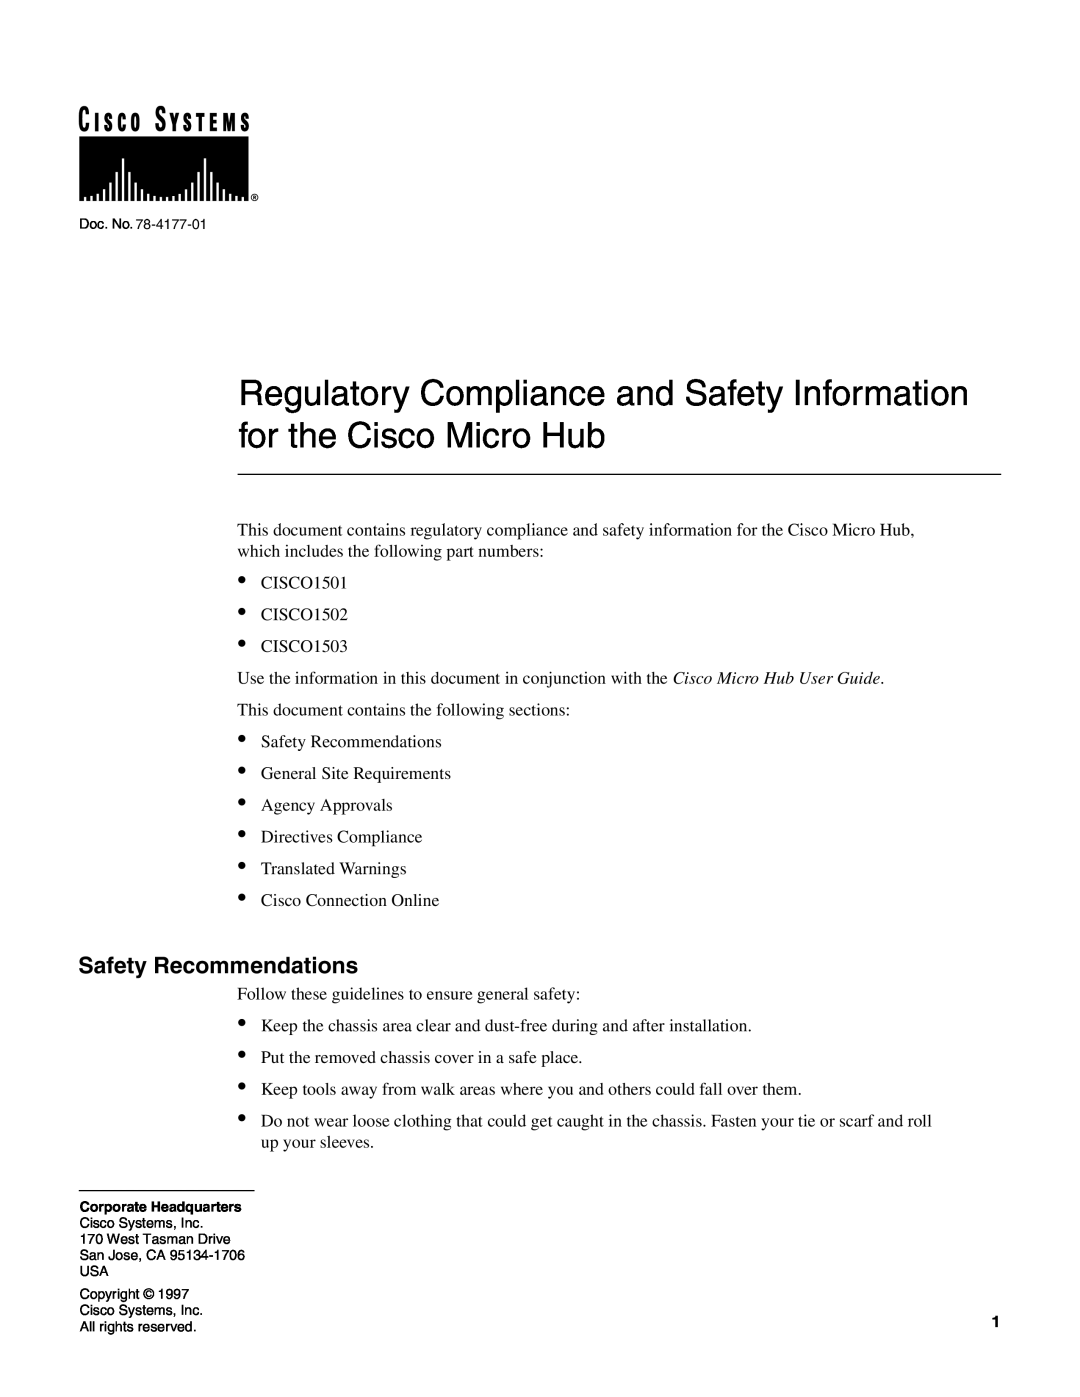 Cisco Systems CISCO1501 manual Safety Recommendations 